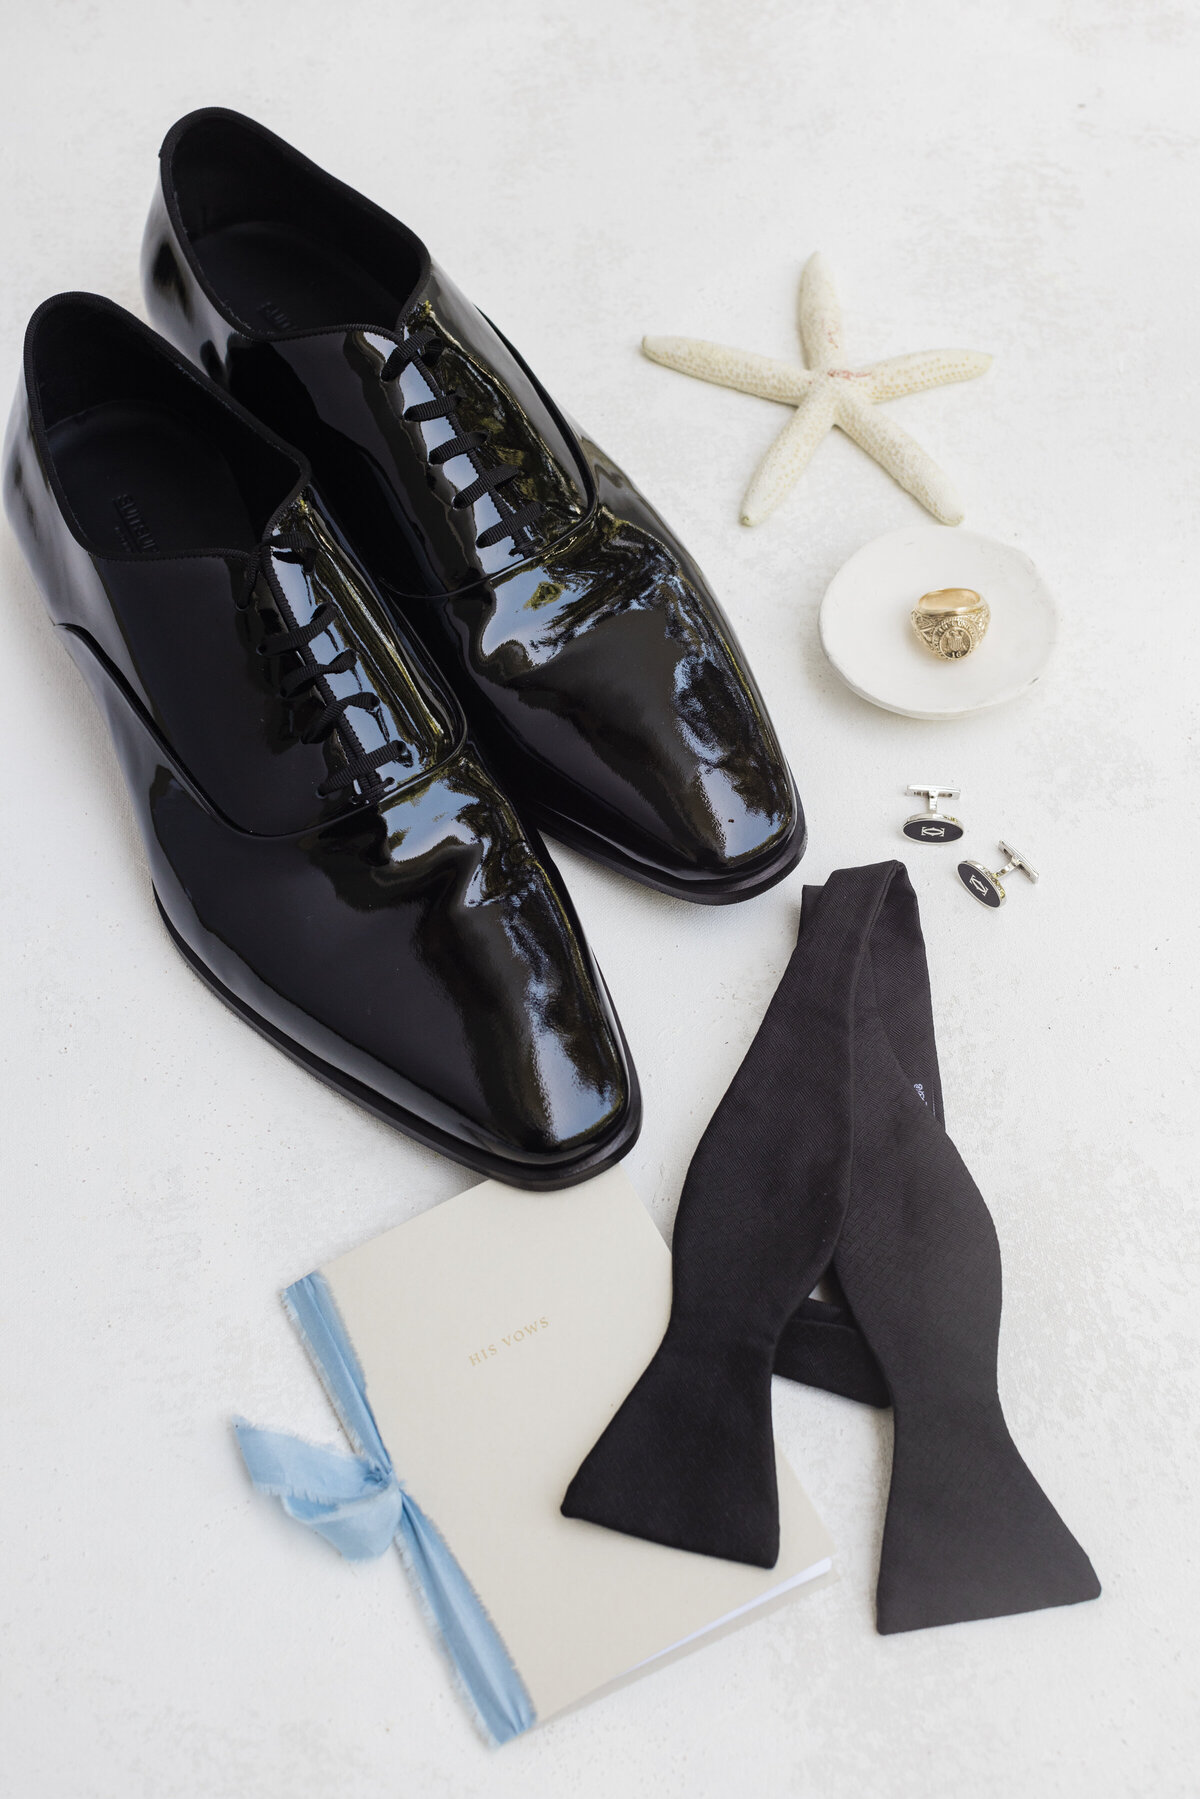 groom-shoes-bowtie